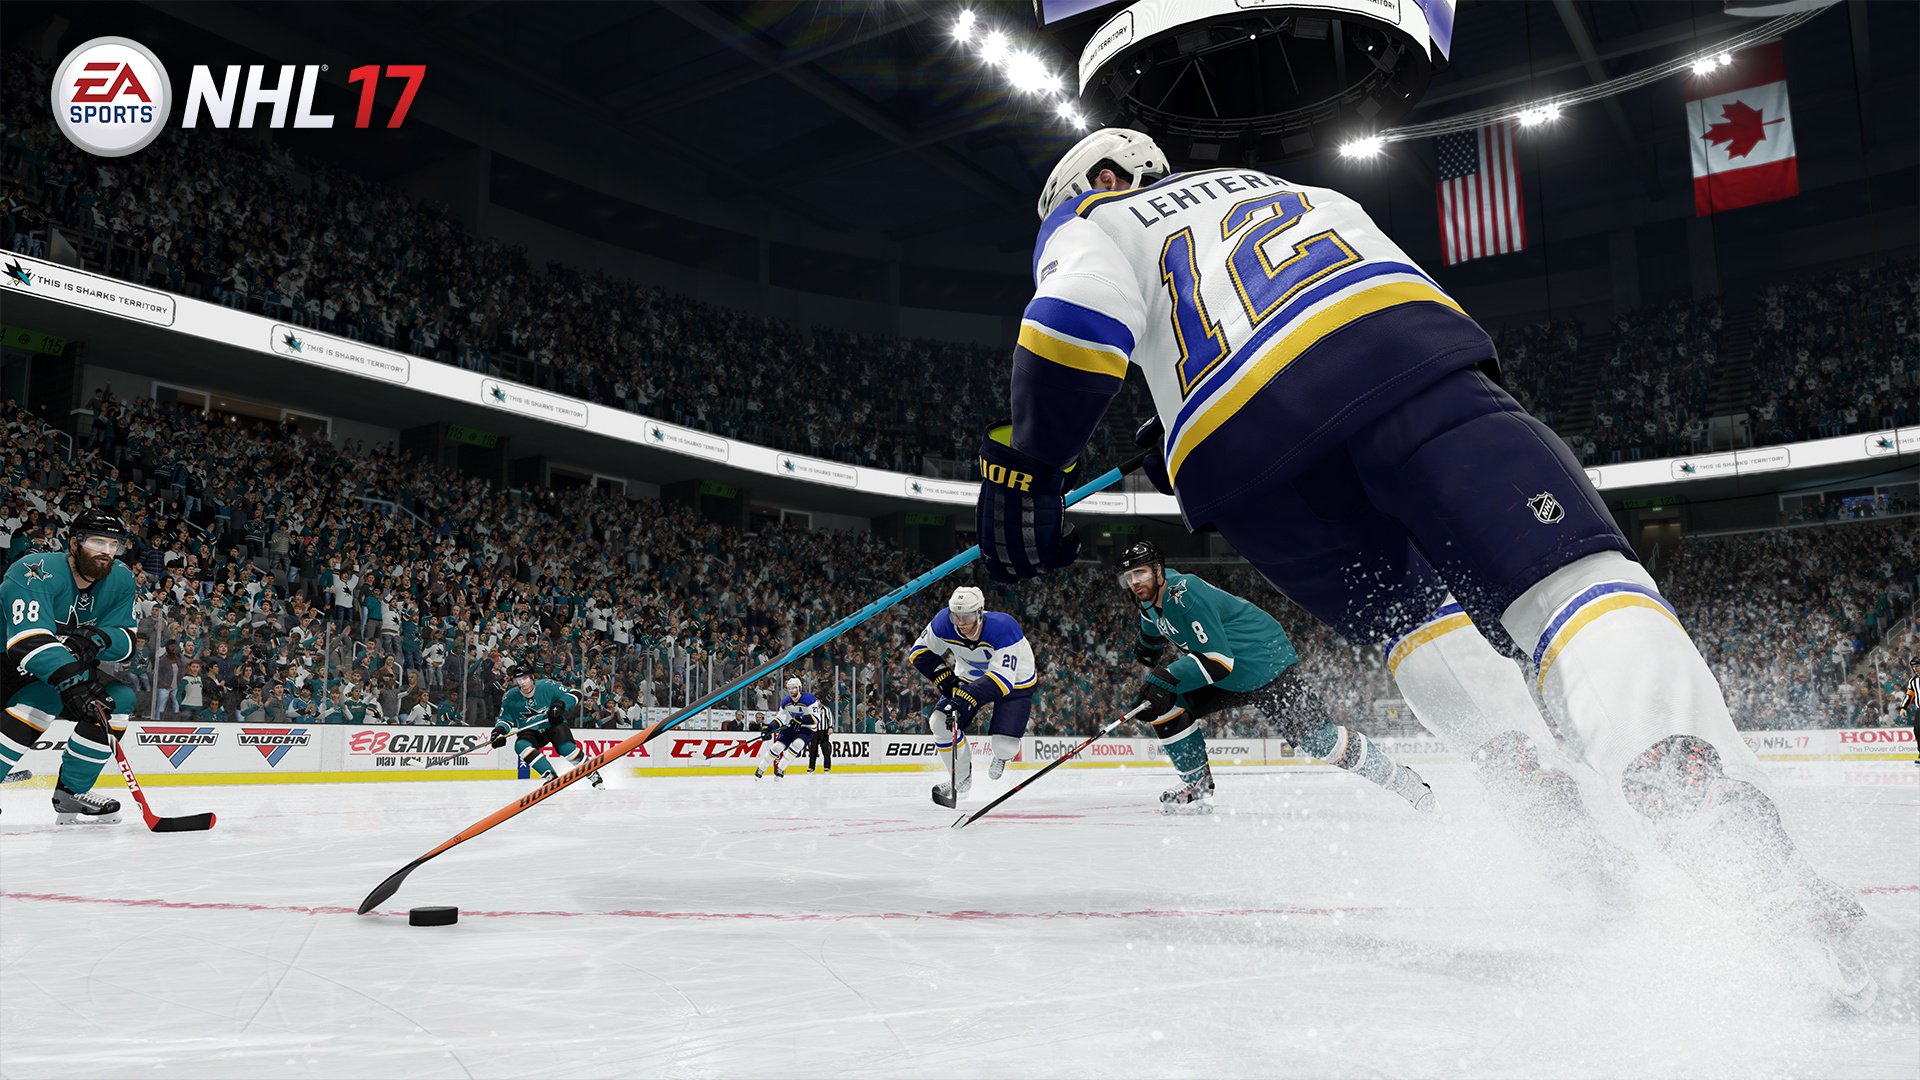 NHL 17 (PS4 / PlayStation 4) Game Profile | News, Reviews, Videos